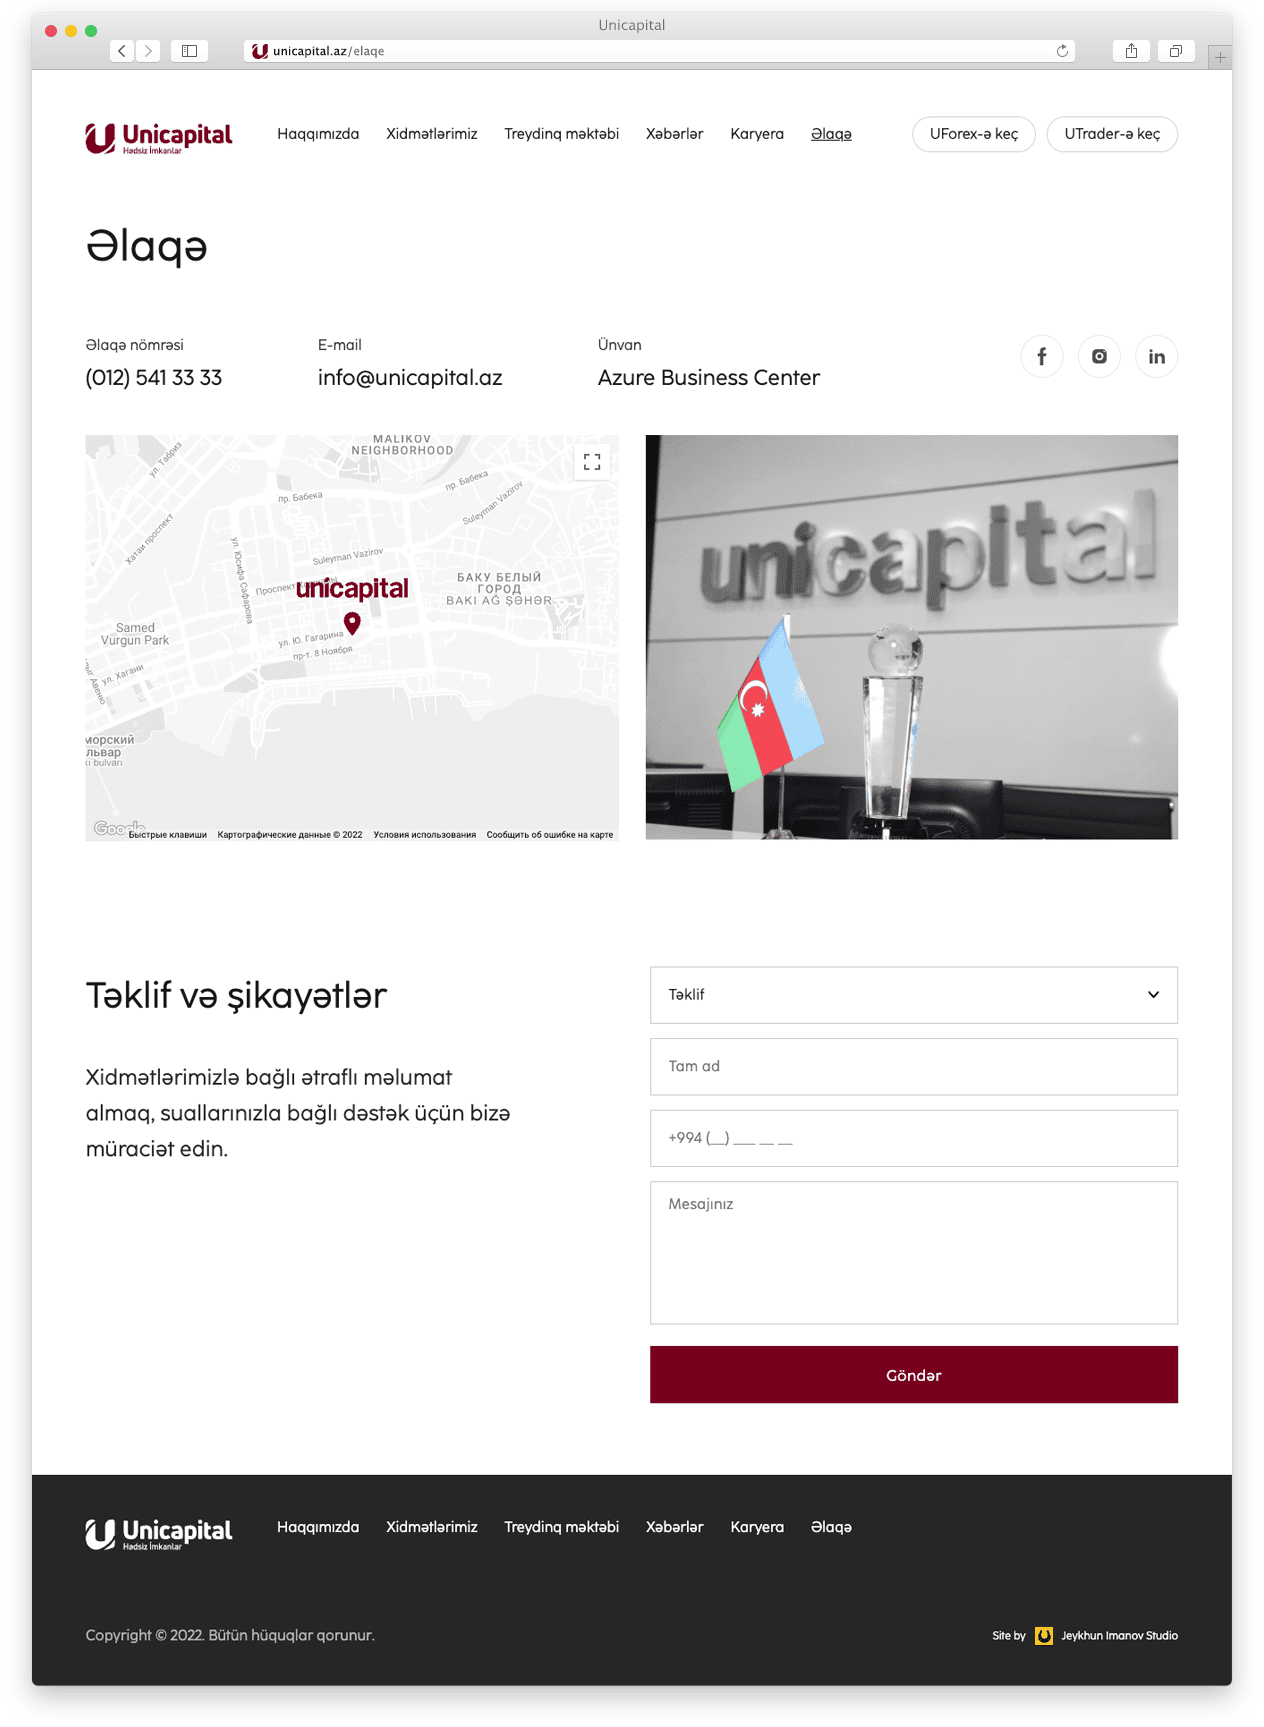 Website for Unicapital 6.png